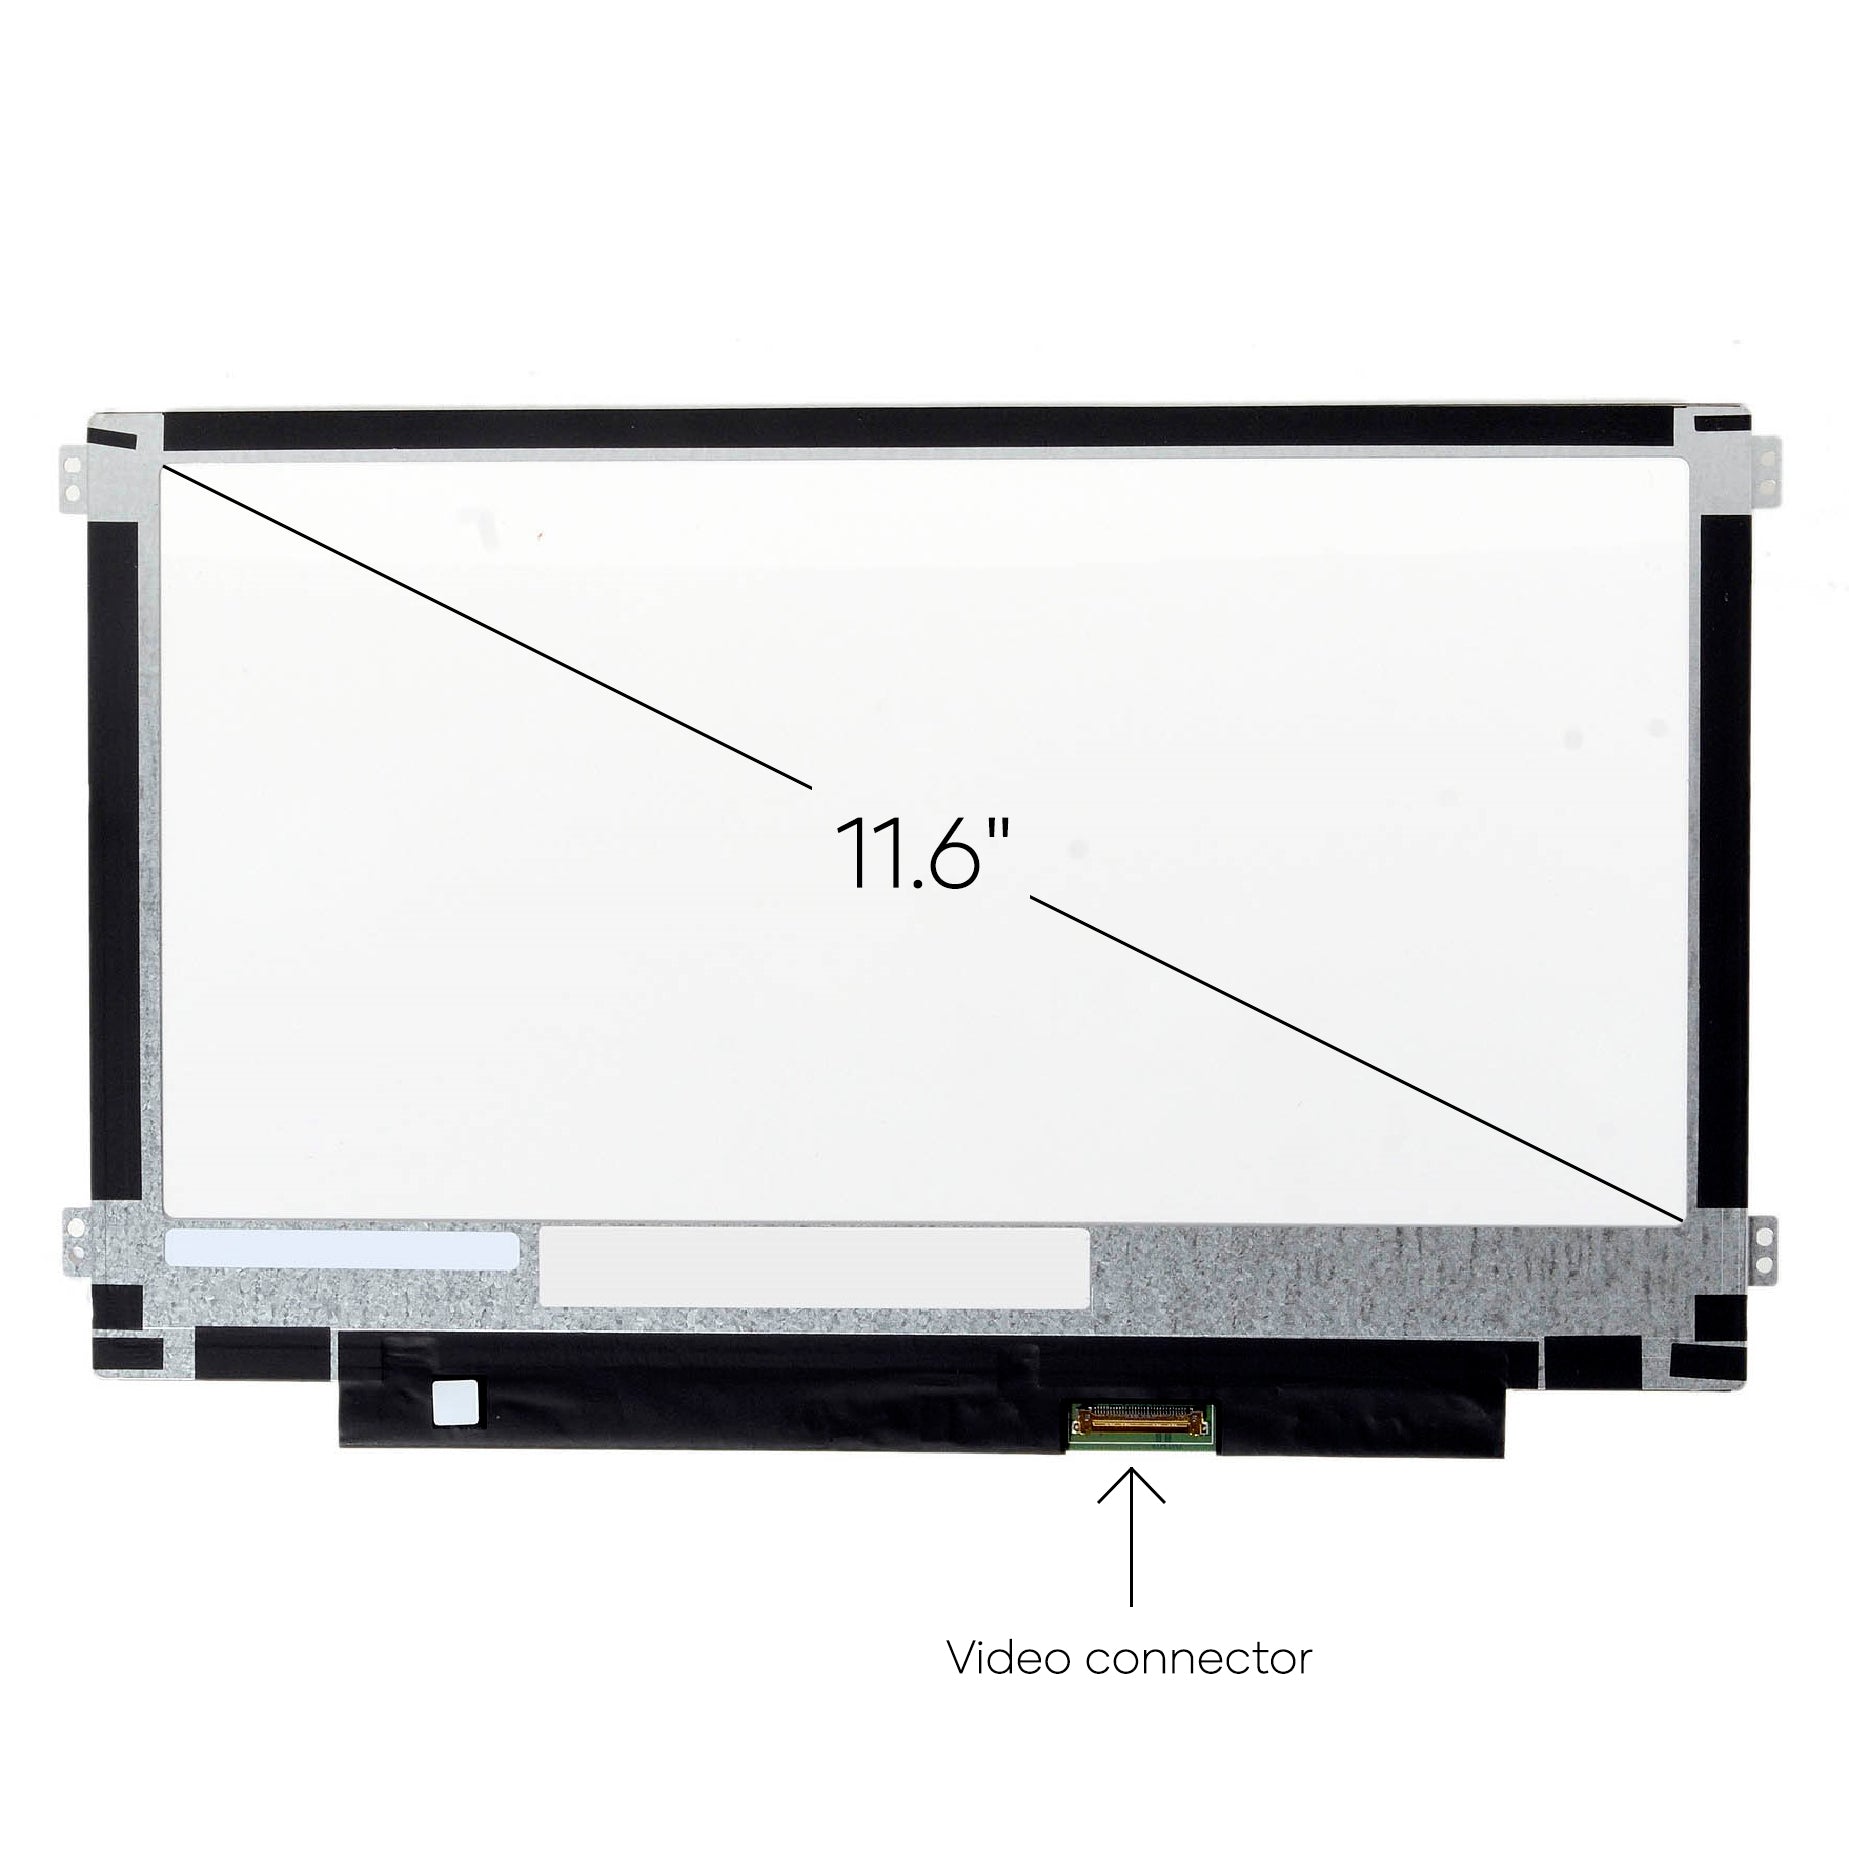 Screen Replacement for HP 11 G3/G4/G5 Chromebook 11.6" LCD 762229-007